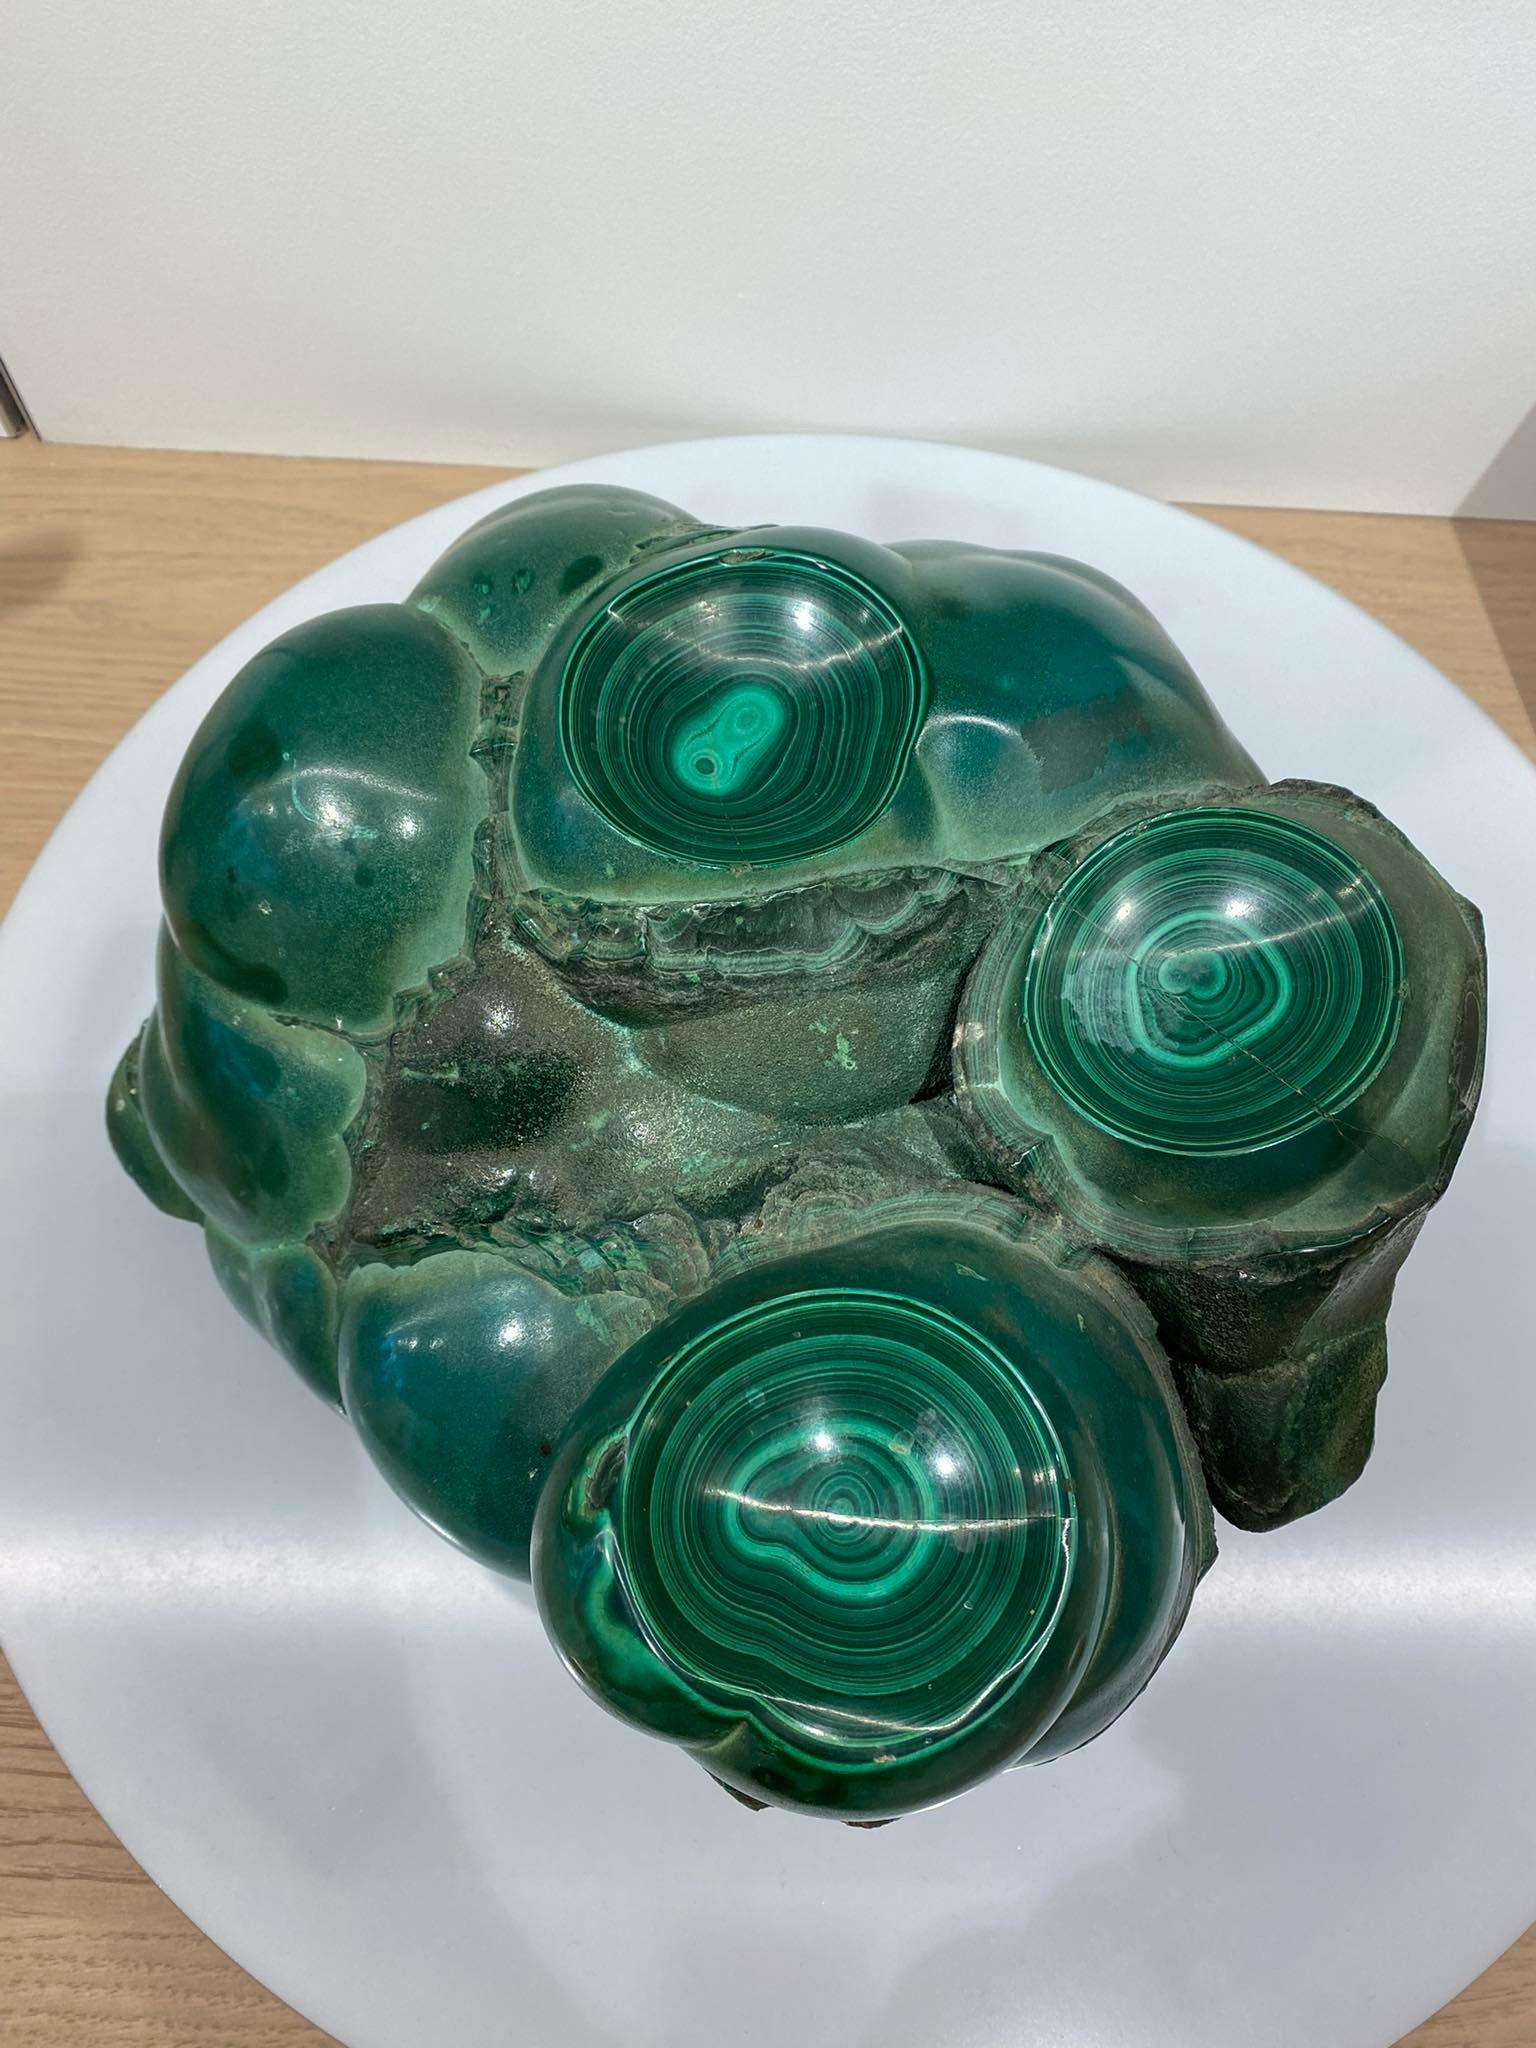 Exceptional Malachite Monobloc Weight 22.3 Kg - From DR Congo - Perfect condition

Which makes it unique it is shape, beautiful green colour and the weight which is 22,3 kg (heavy monobloc piece)

